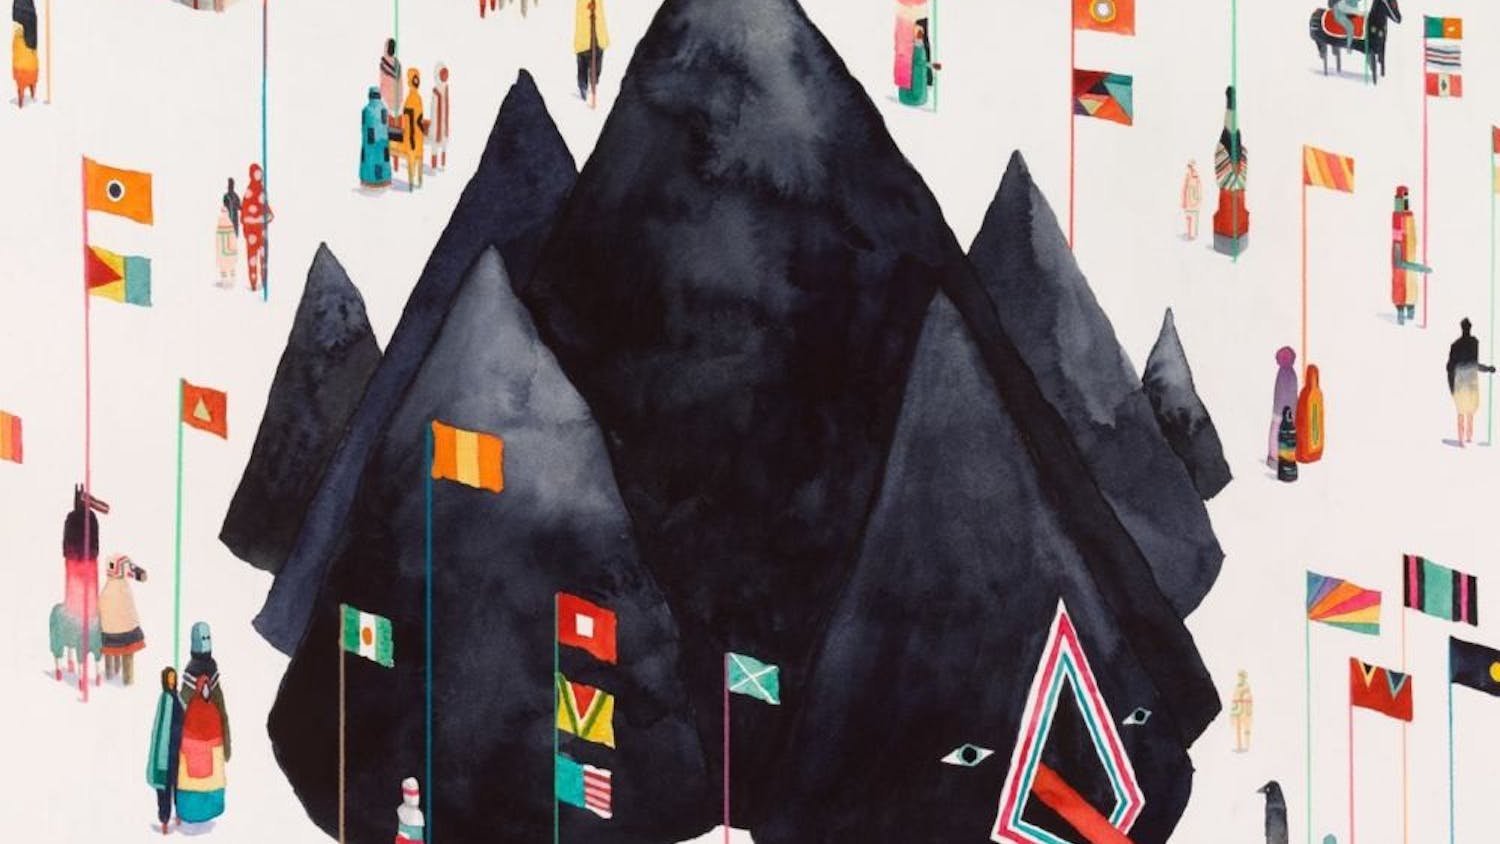 Young the Giant's third album, "Home of the Strange," released on Aug. 12.